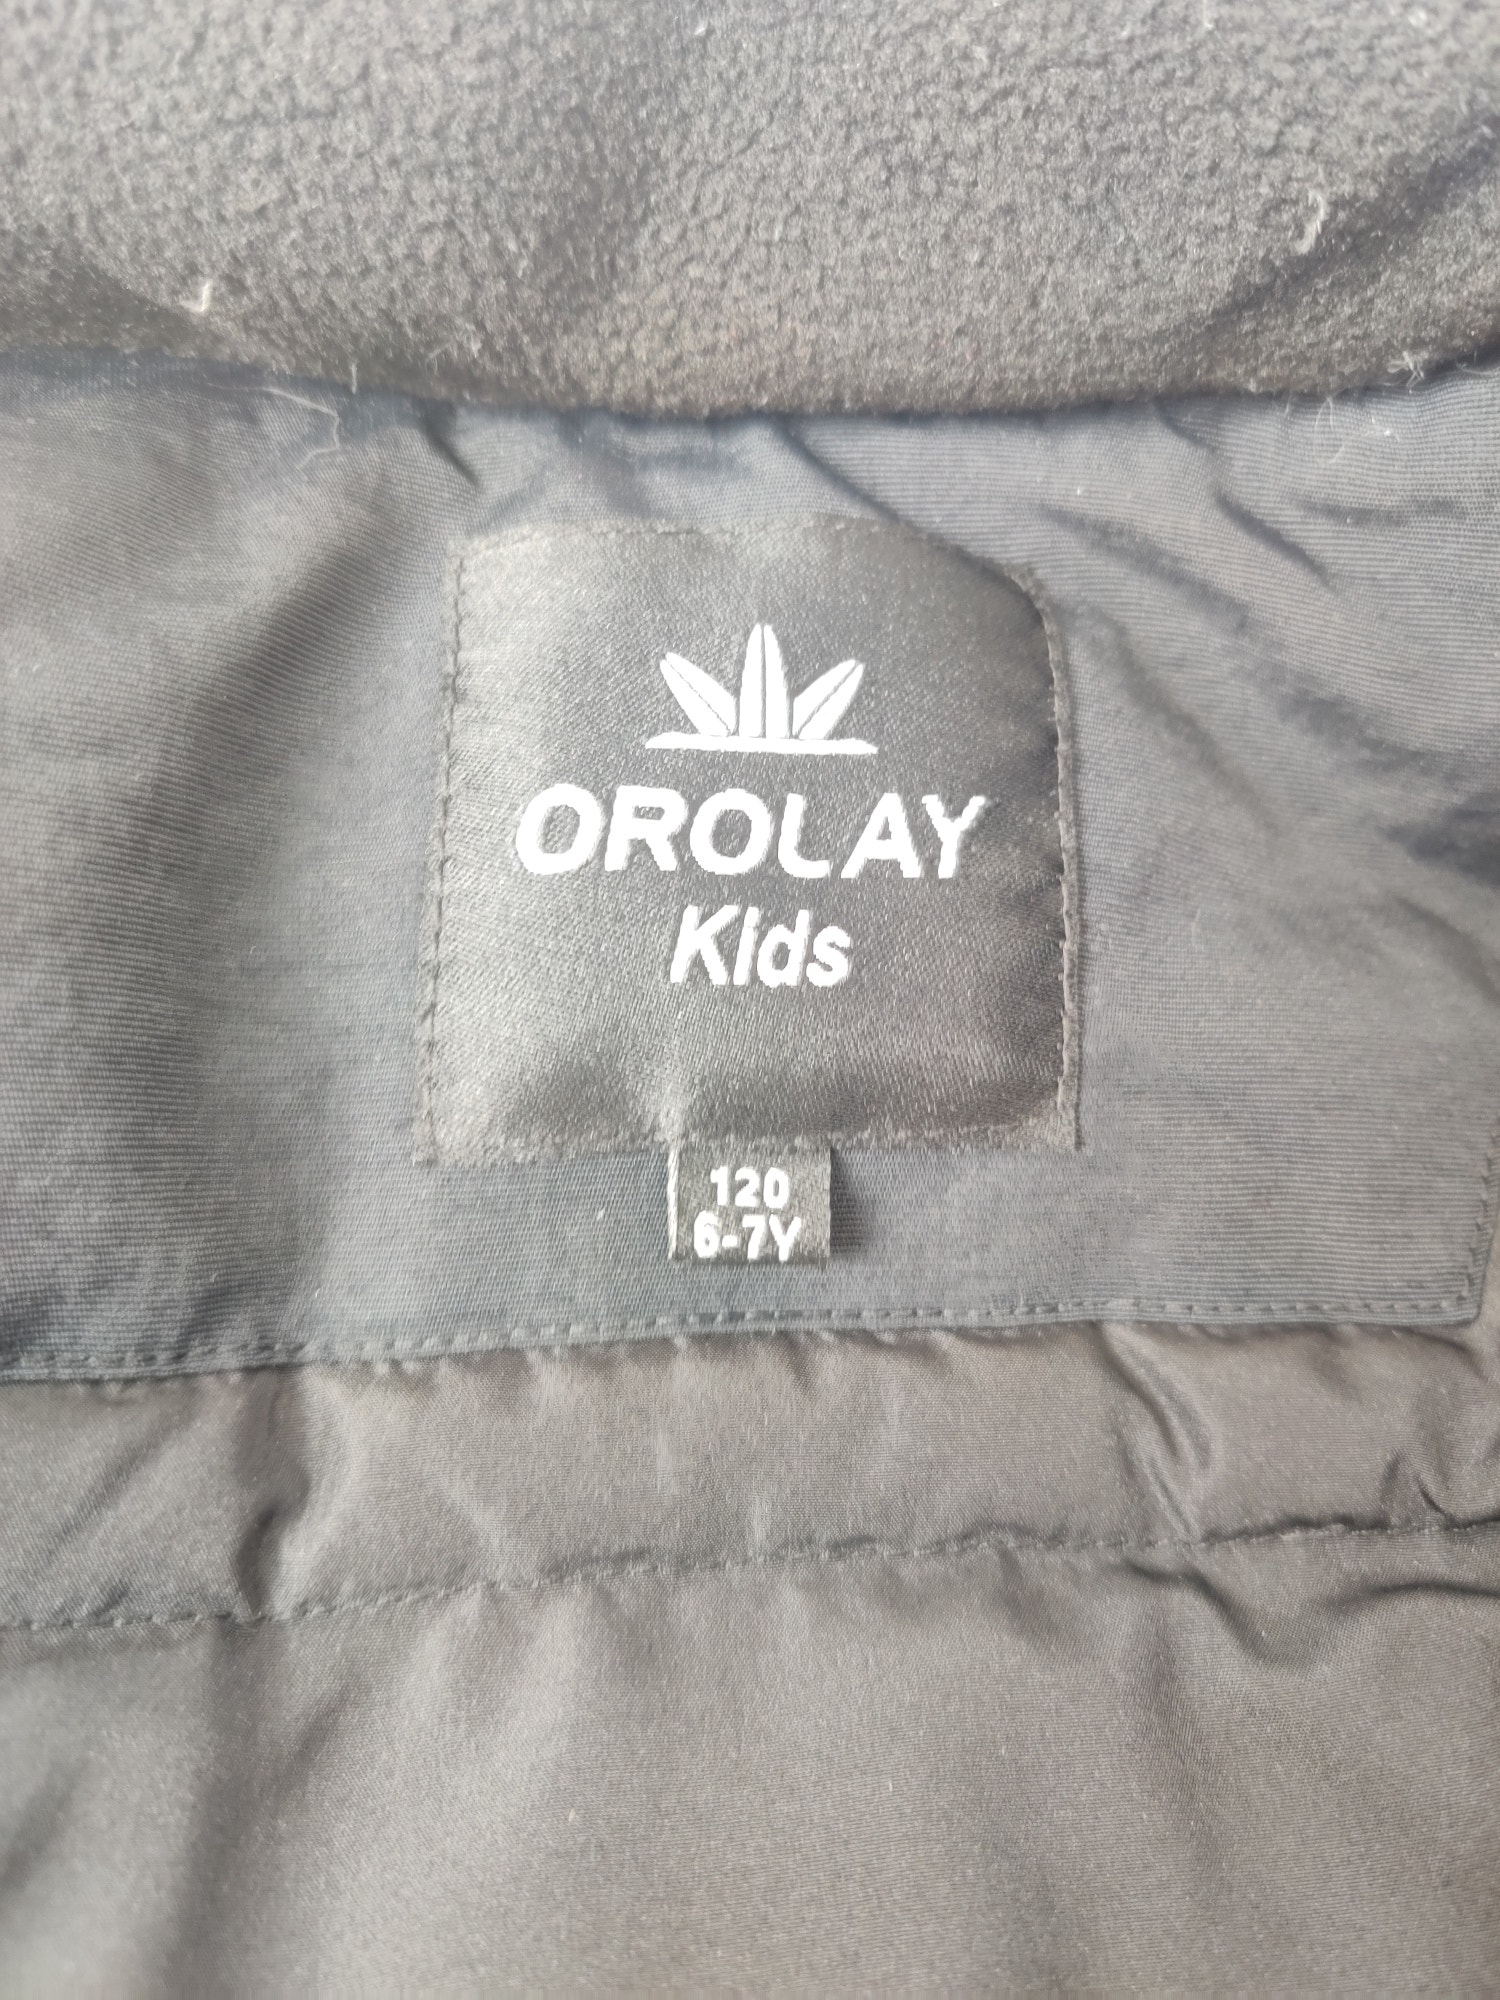 OROLAY KIDS DUCK DOWN HOOD GIRL'S BLACK POCKETS KID'S JACKET SIZE 6-7Y - Picture 10 of 12